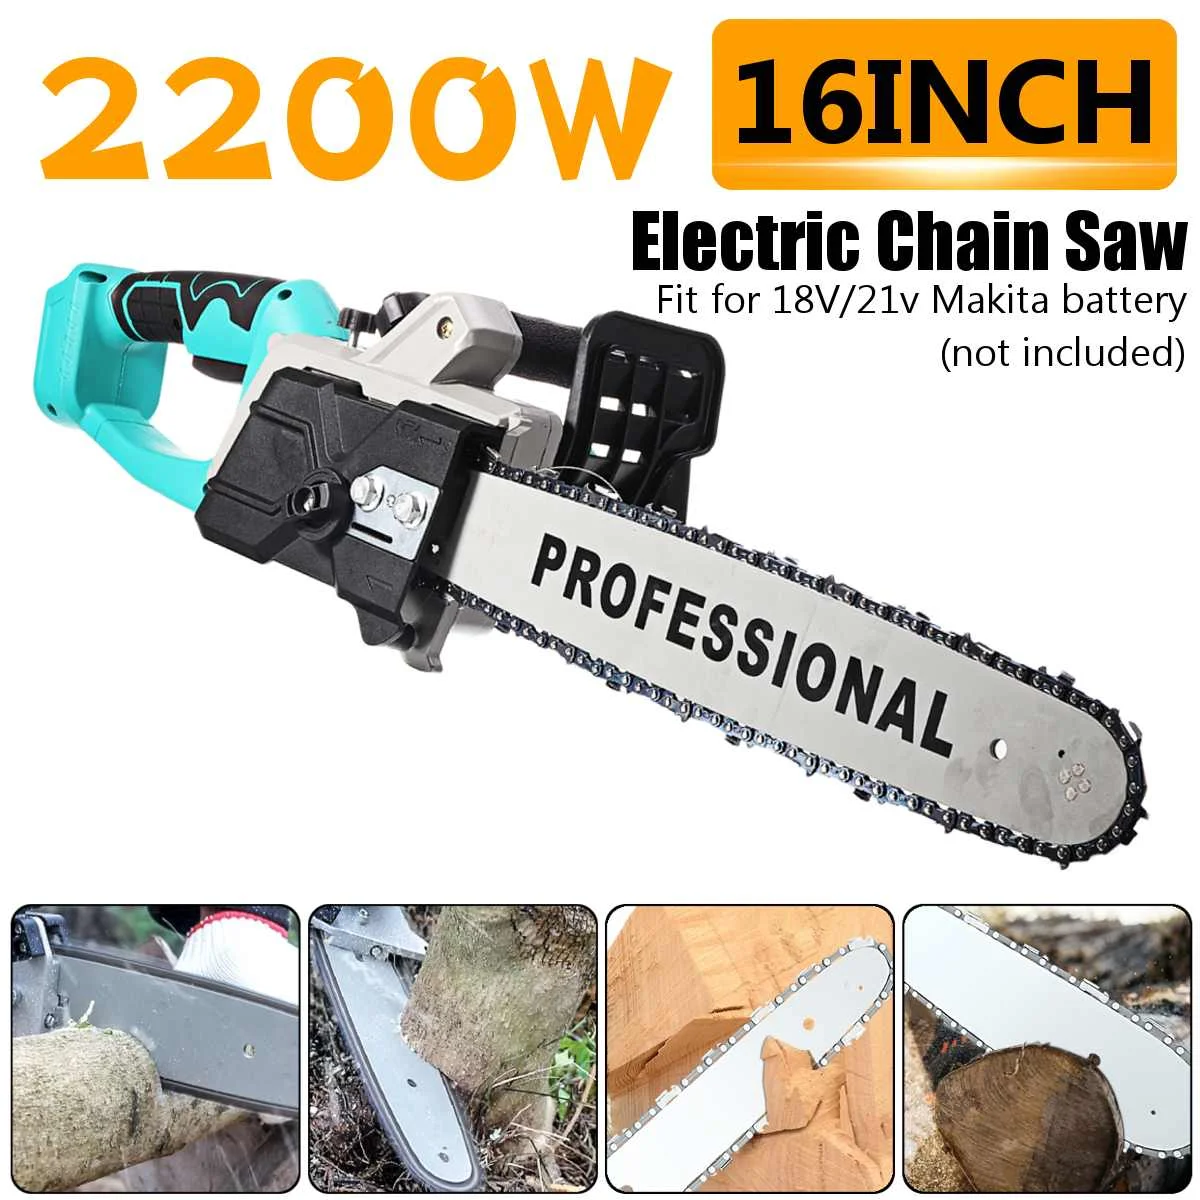 

2200W 16 Inch Cordless Chain Saw Brushless Motor Power Tools Electric Chainsaw Garden Woodworking Power Tools For Makita battery